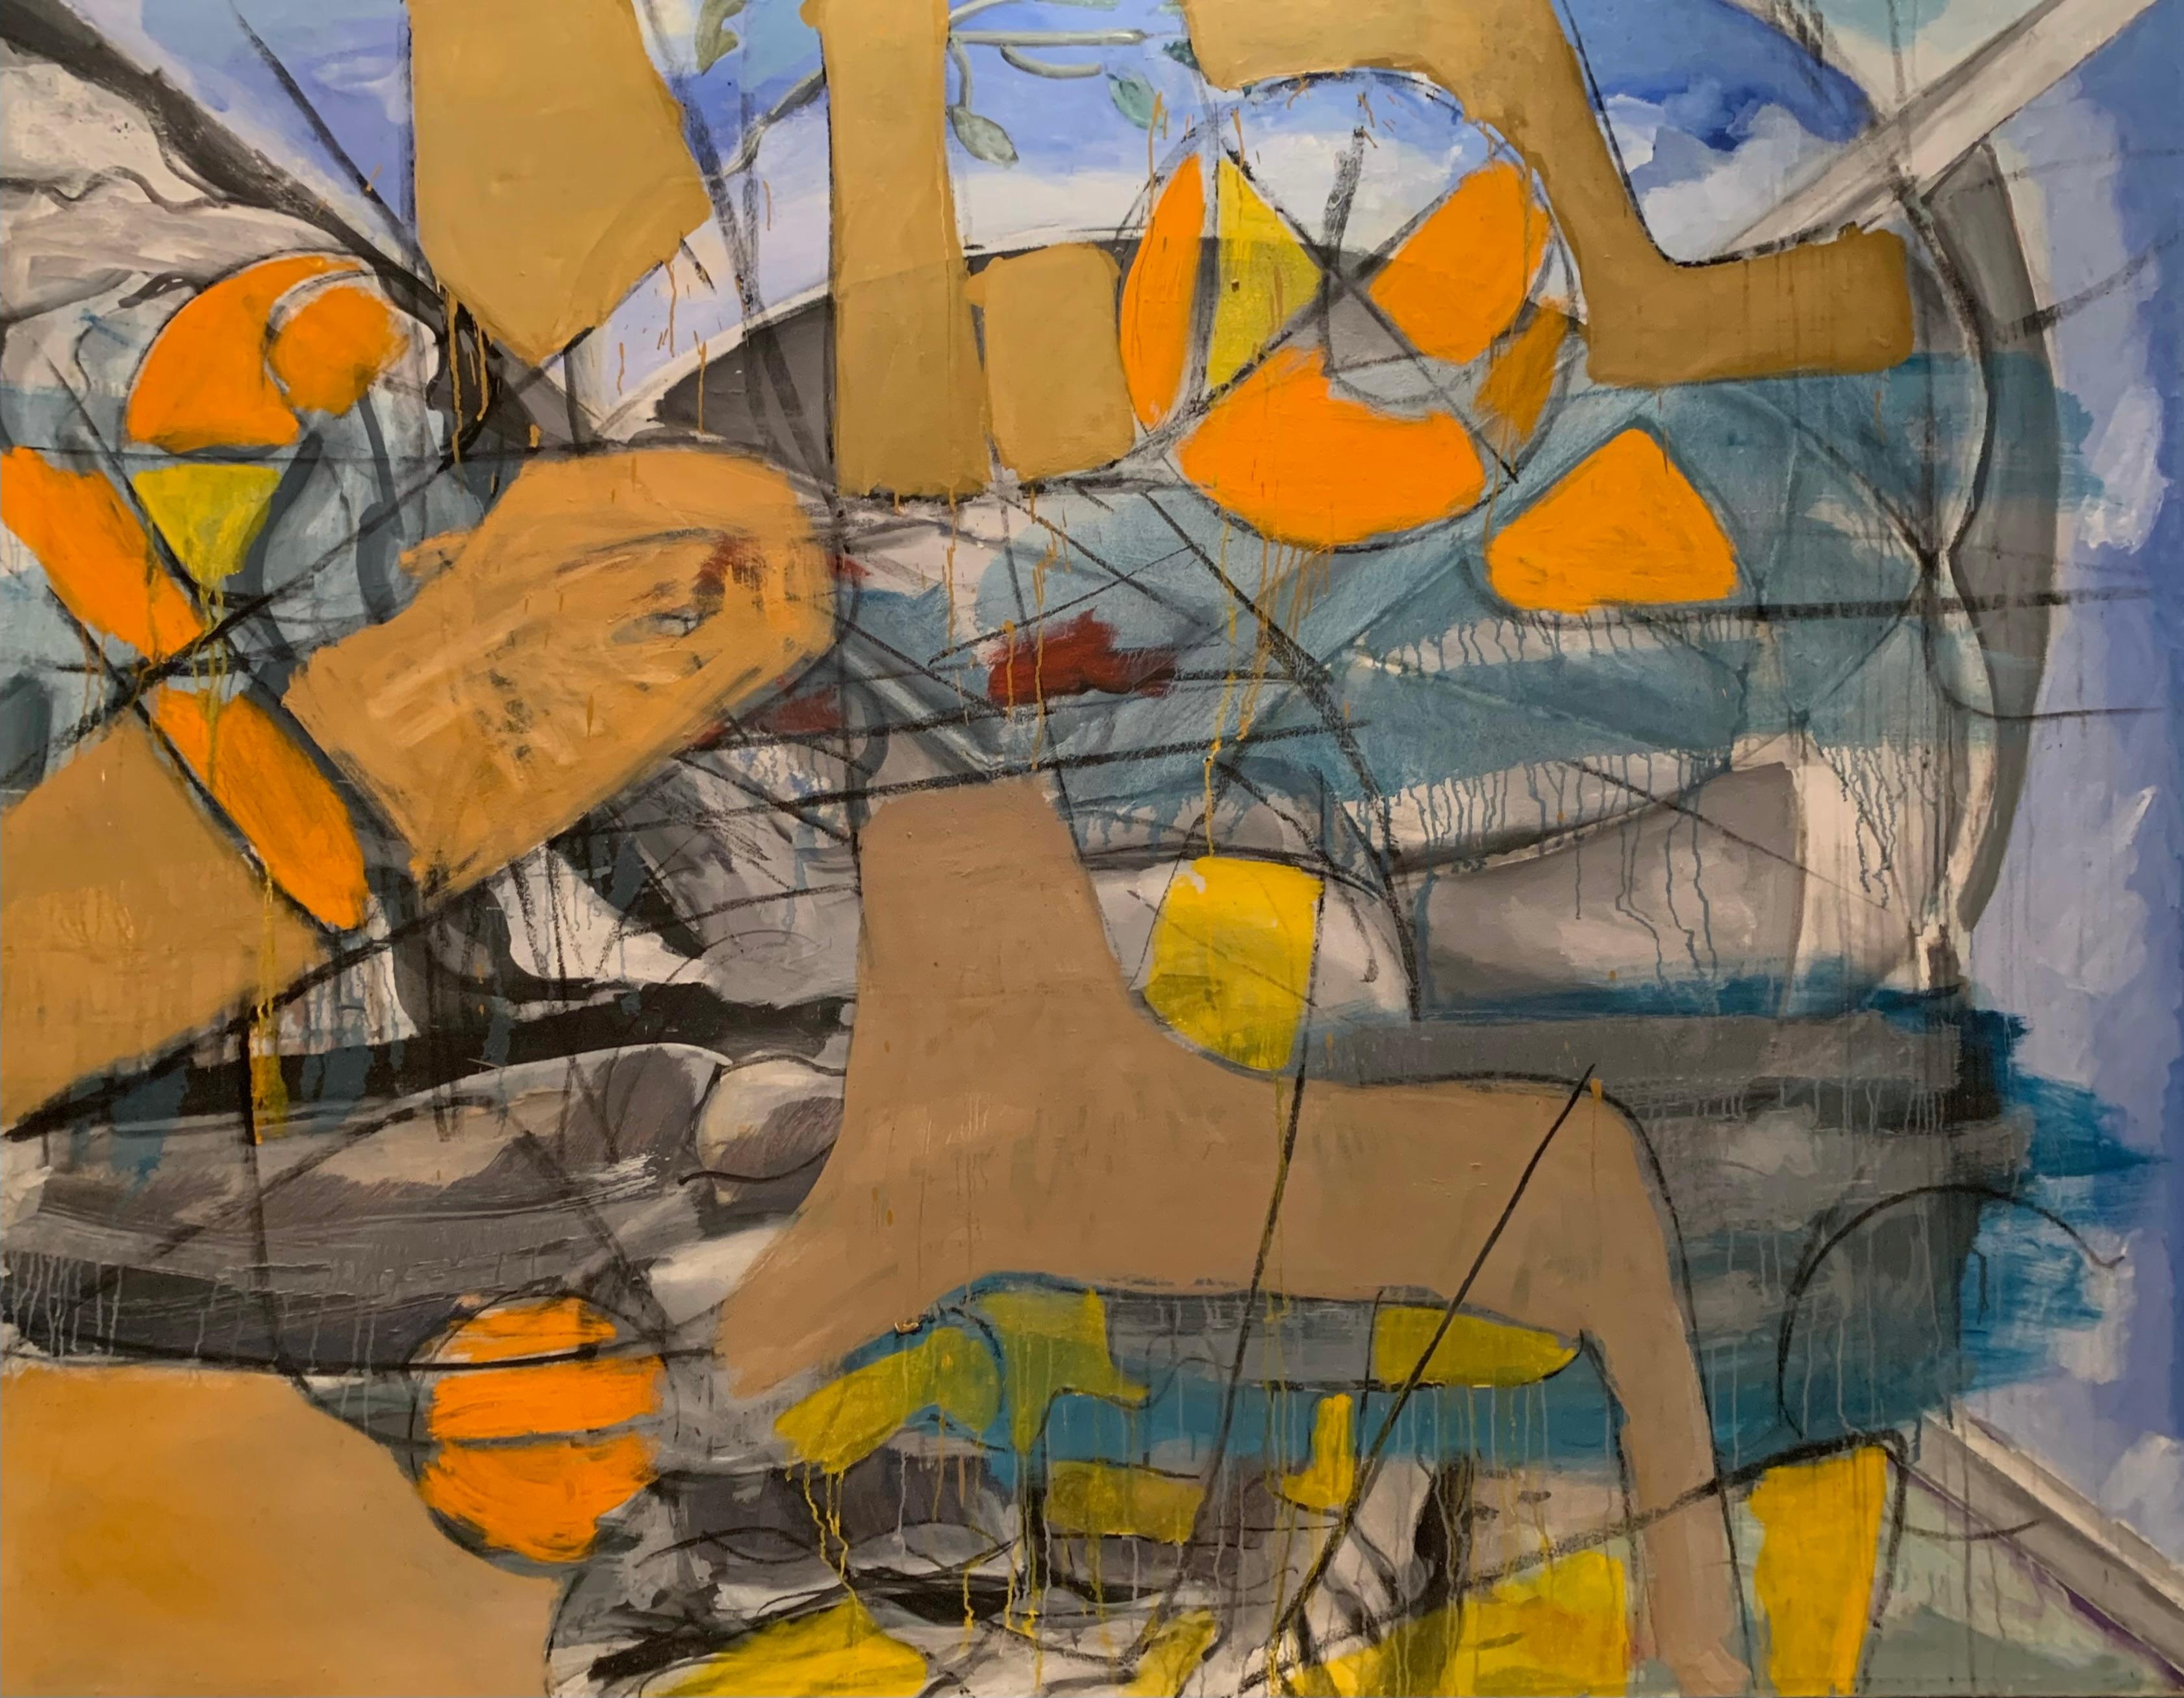 "Oasis" Large Orange and Blue Mixed Media Contemporary Abstract by S. Rehfeld